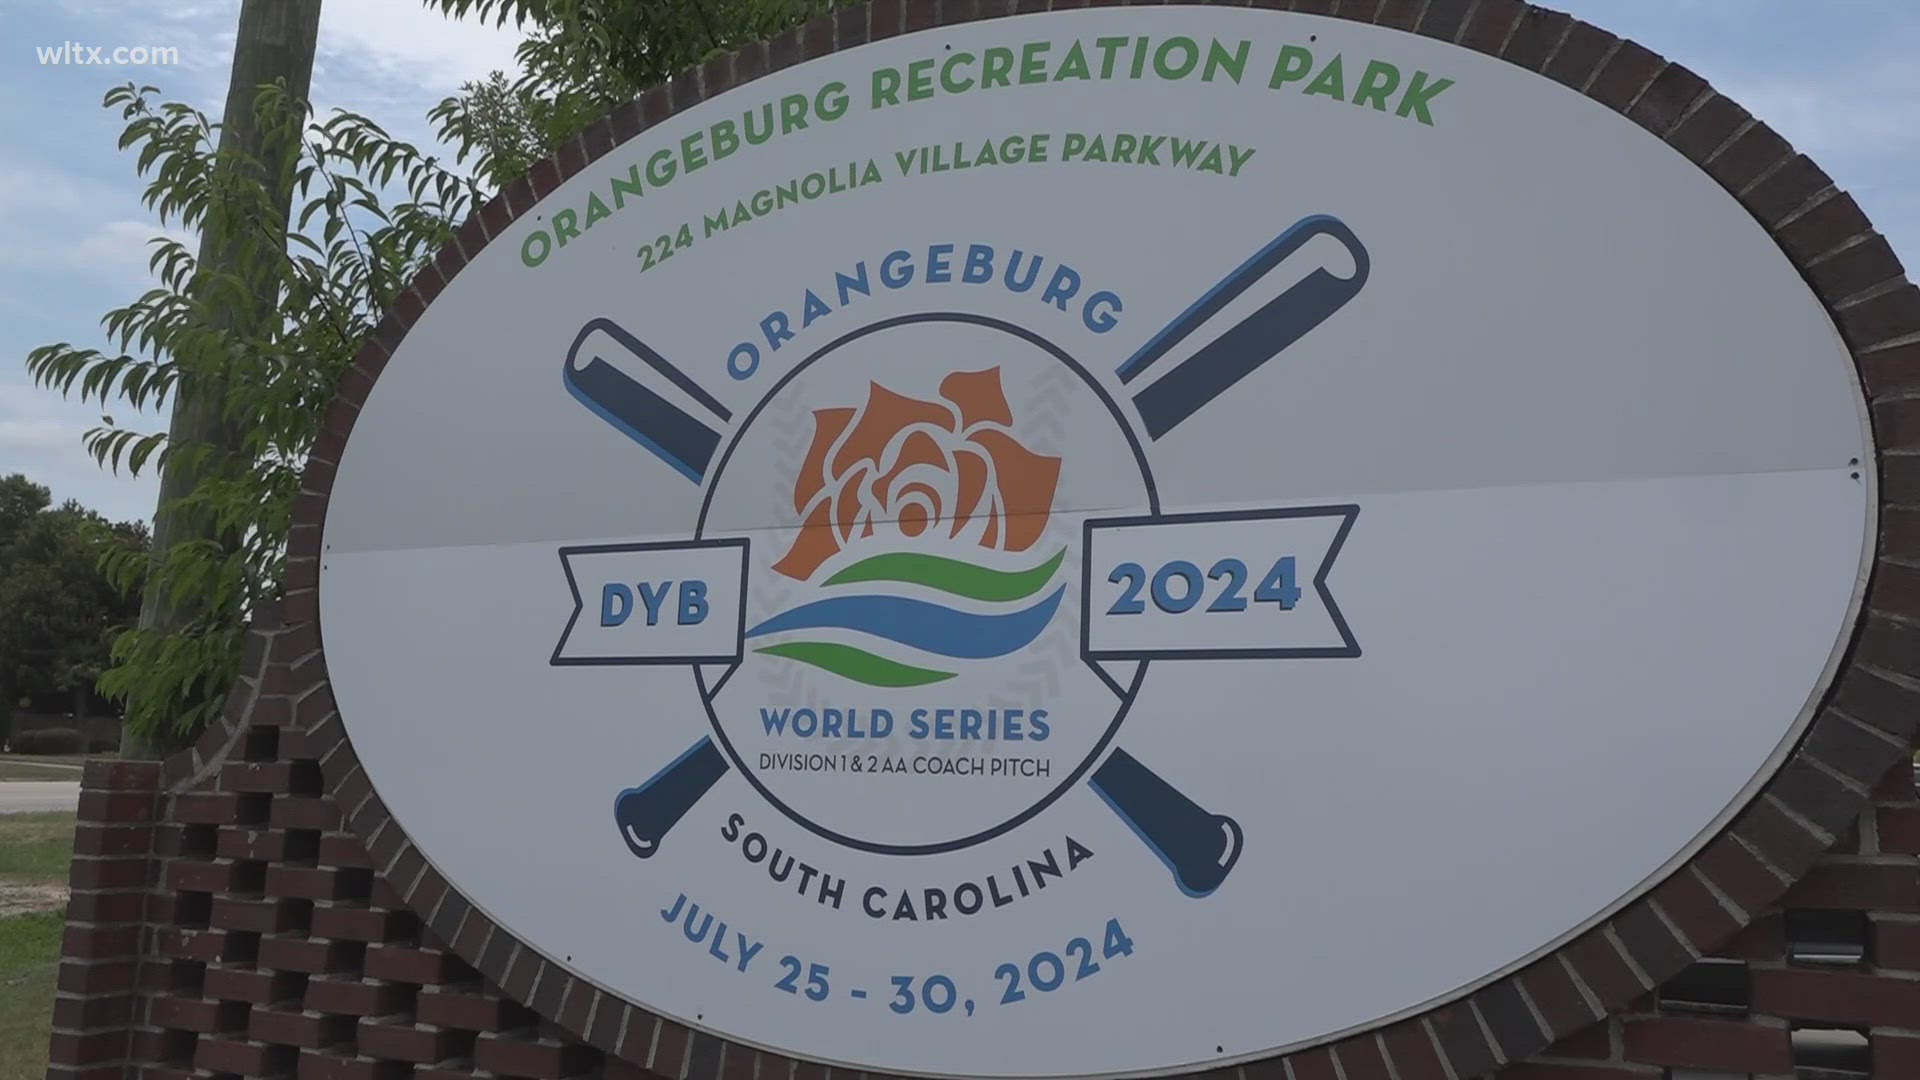 The city of Orangeburg is preparing to host the Diamond Youth Baseball World Series next month and the town is hoping it's a win for businesses.